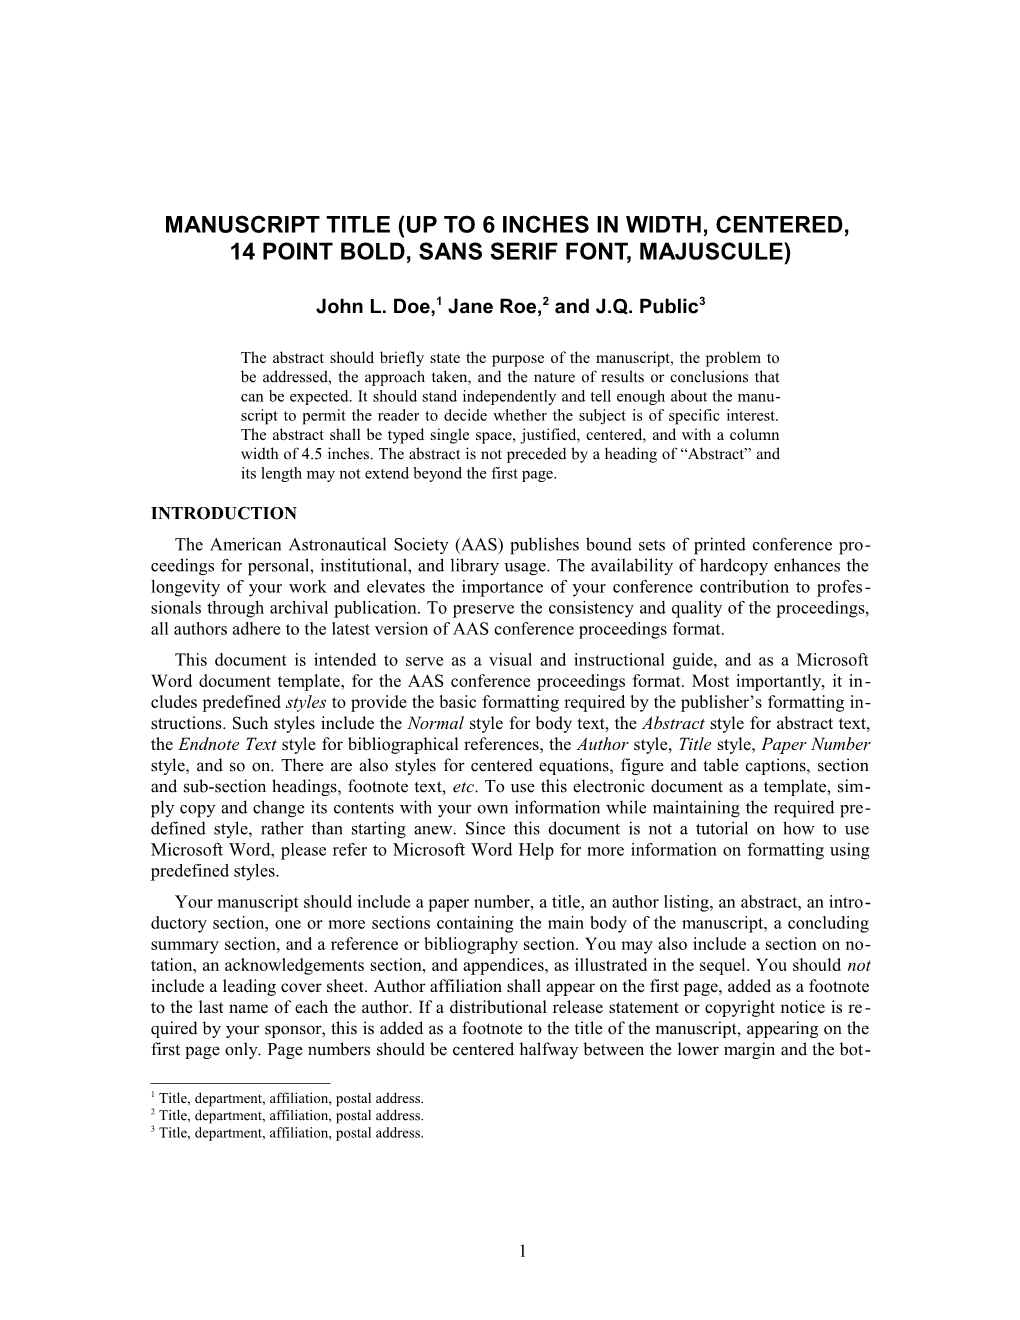 Paper Title (Up to 6 Inches in Width and Centered